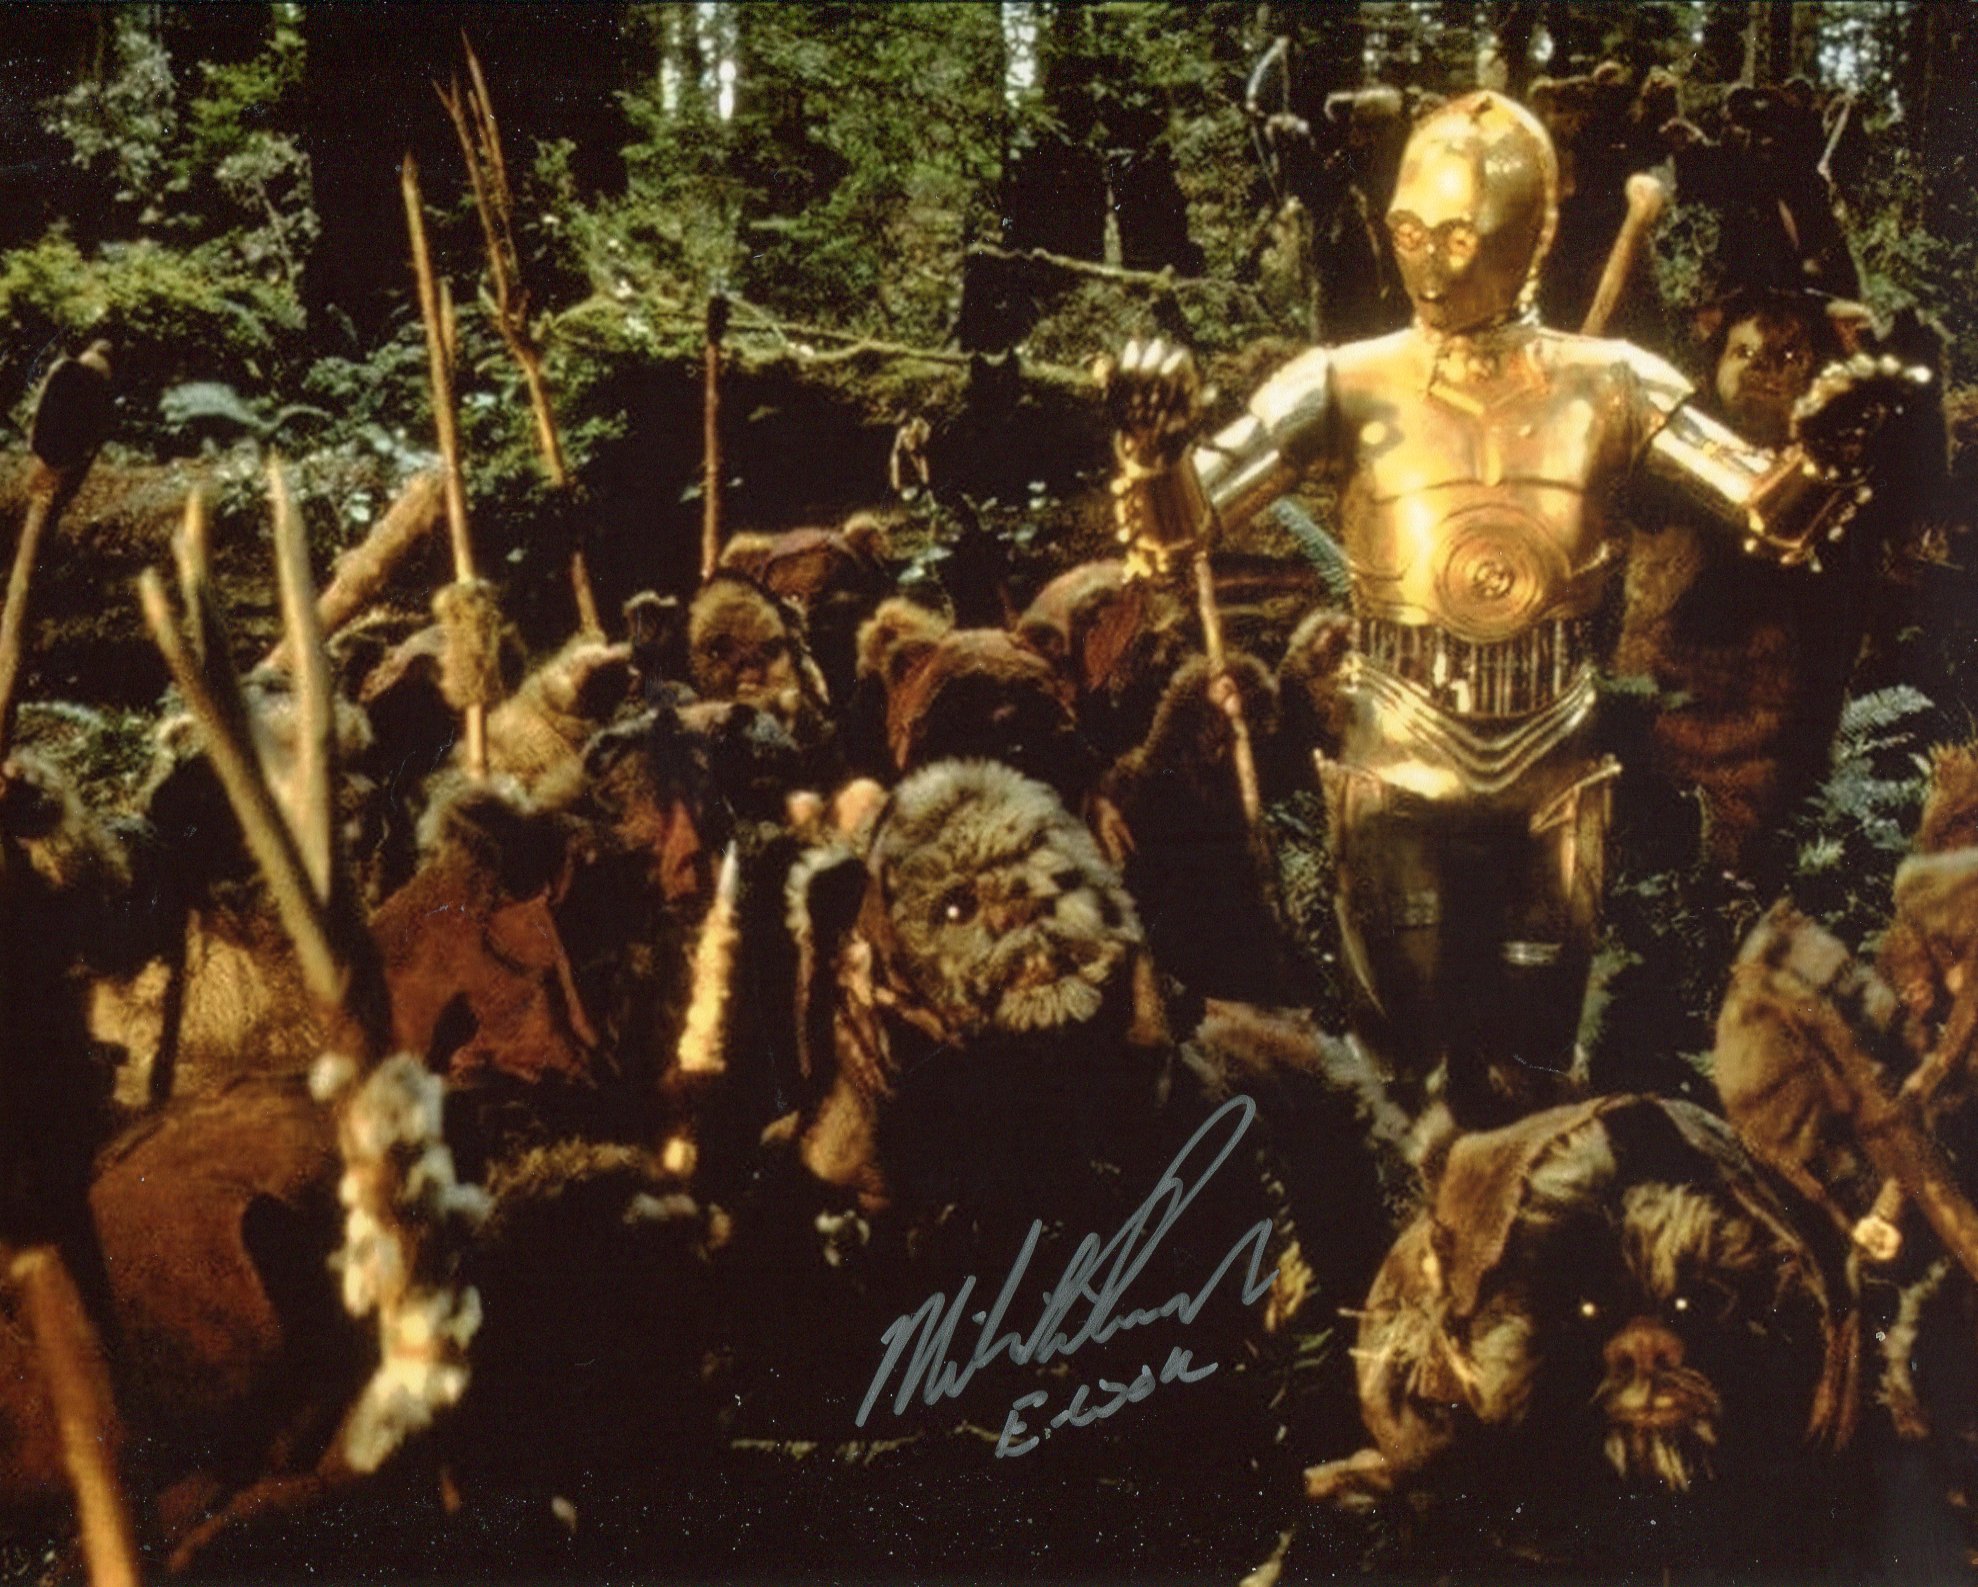 Star Wars 8x10 Return of the Jedi photo signed by Ewok actor Michael Henbury. Good condition. All